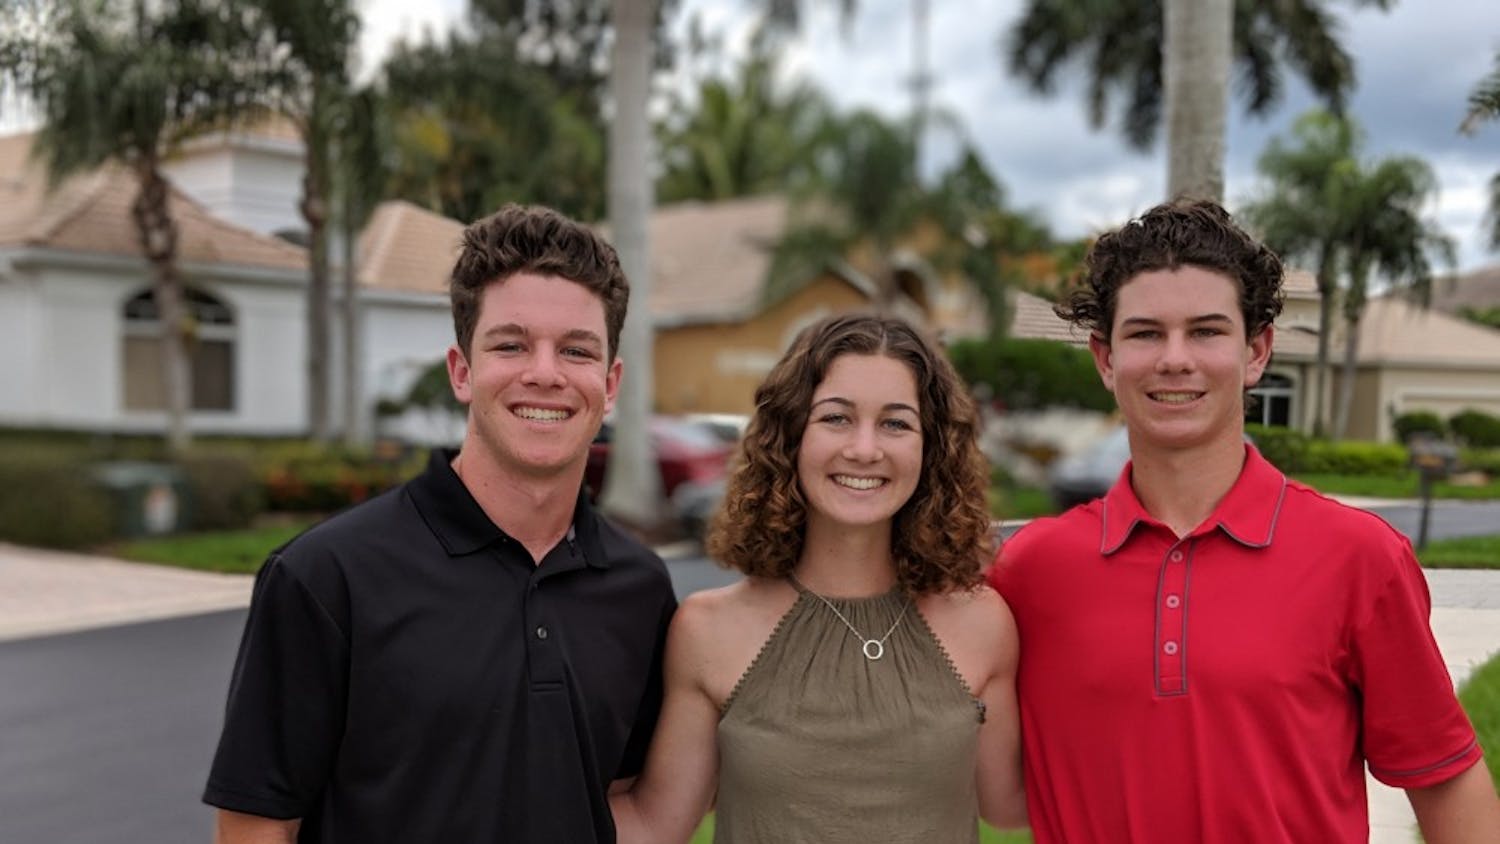 Emily Isaacman poses at Thanksgiving with younger brothers Max, 17, and Zach, 14. Max and Zach both attend Torrey Pines High School in San Diego.